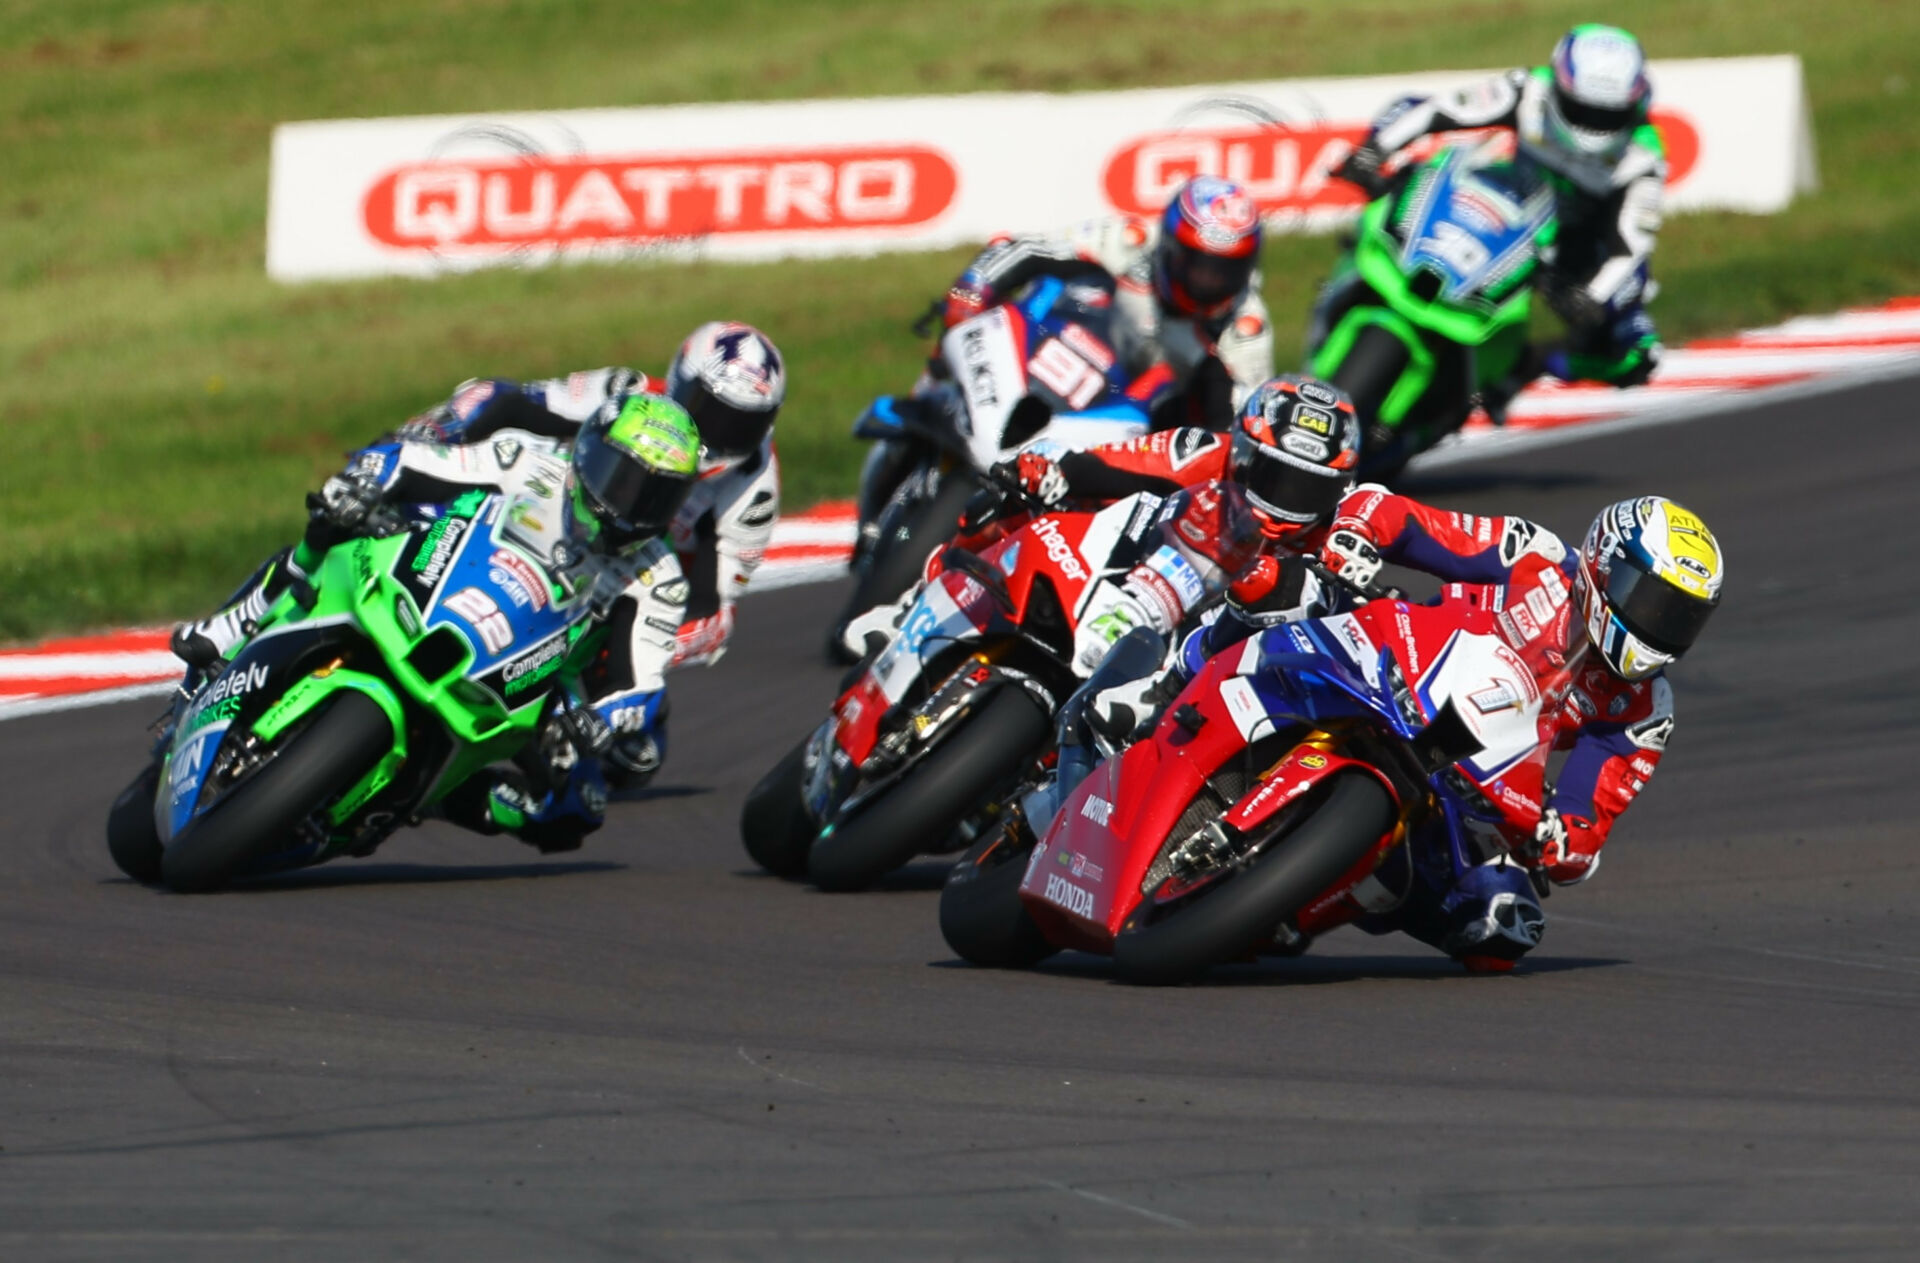 Tommy Bridewell (1) leads Glenn Irwin (2), Jason O'Halloran (22), and the rest in a British Superbike race Sunday at Donington Park. Photo courtesy MSVR.